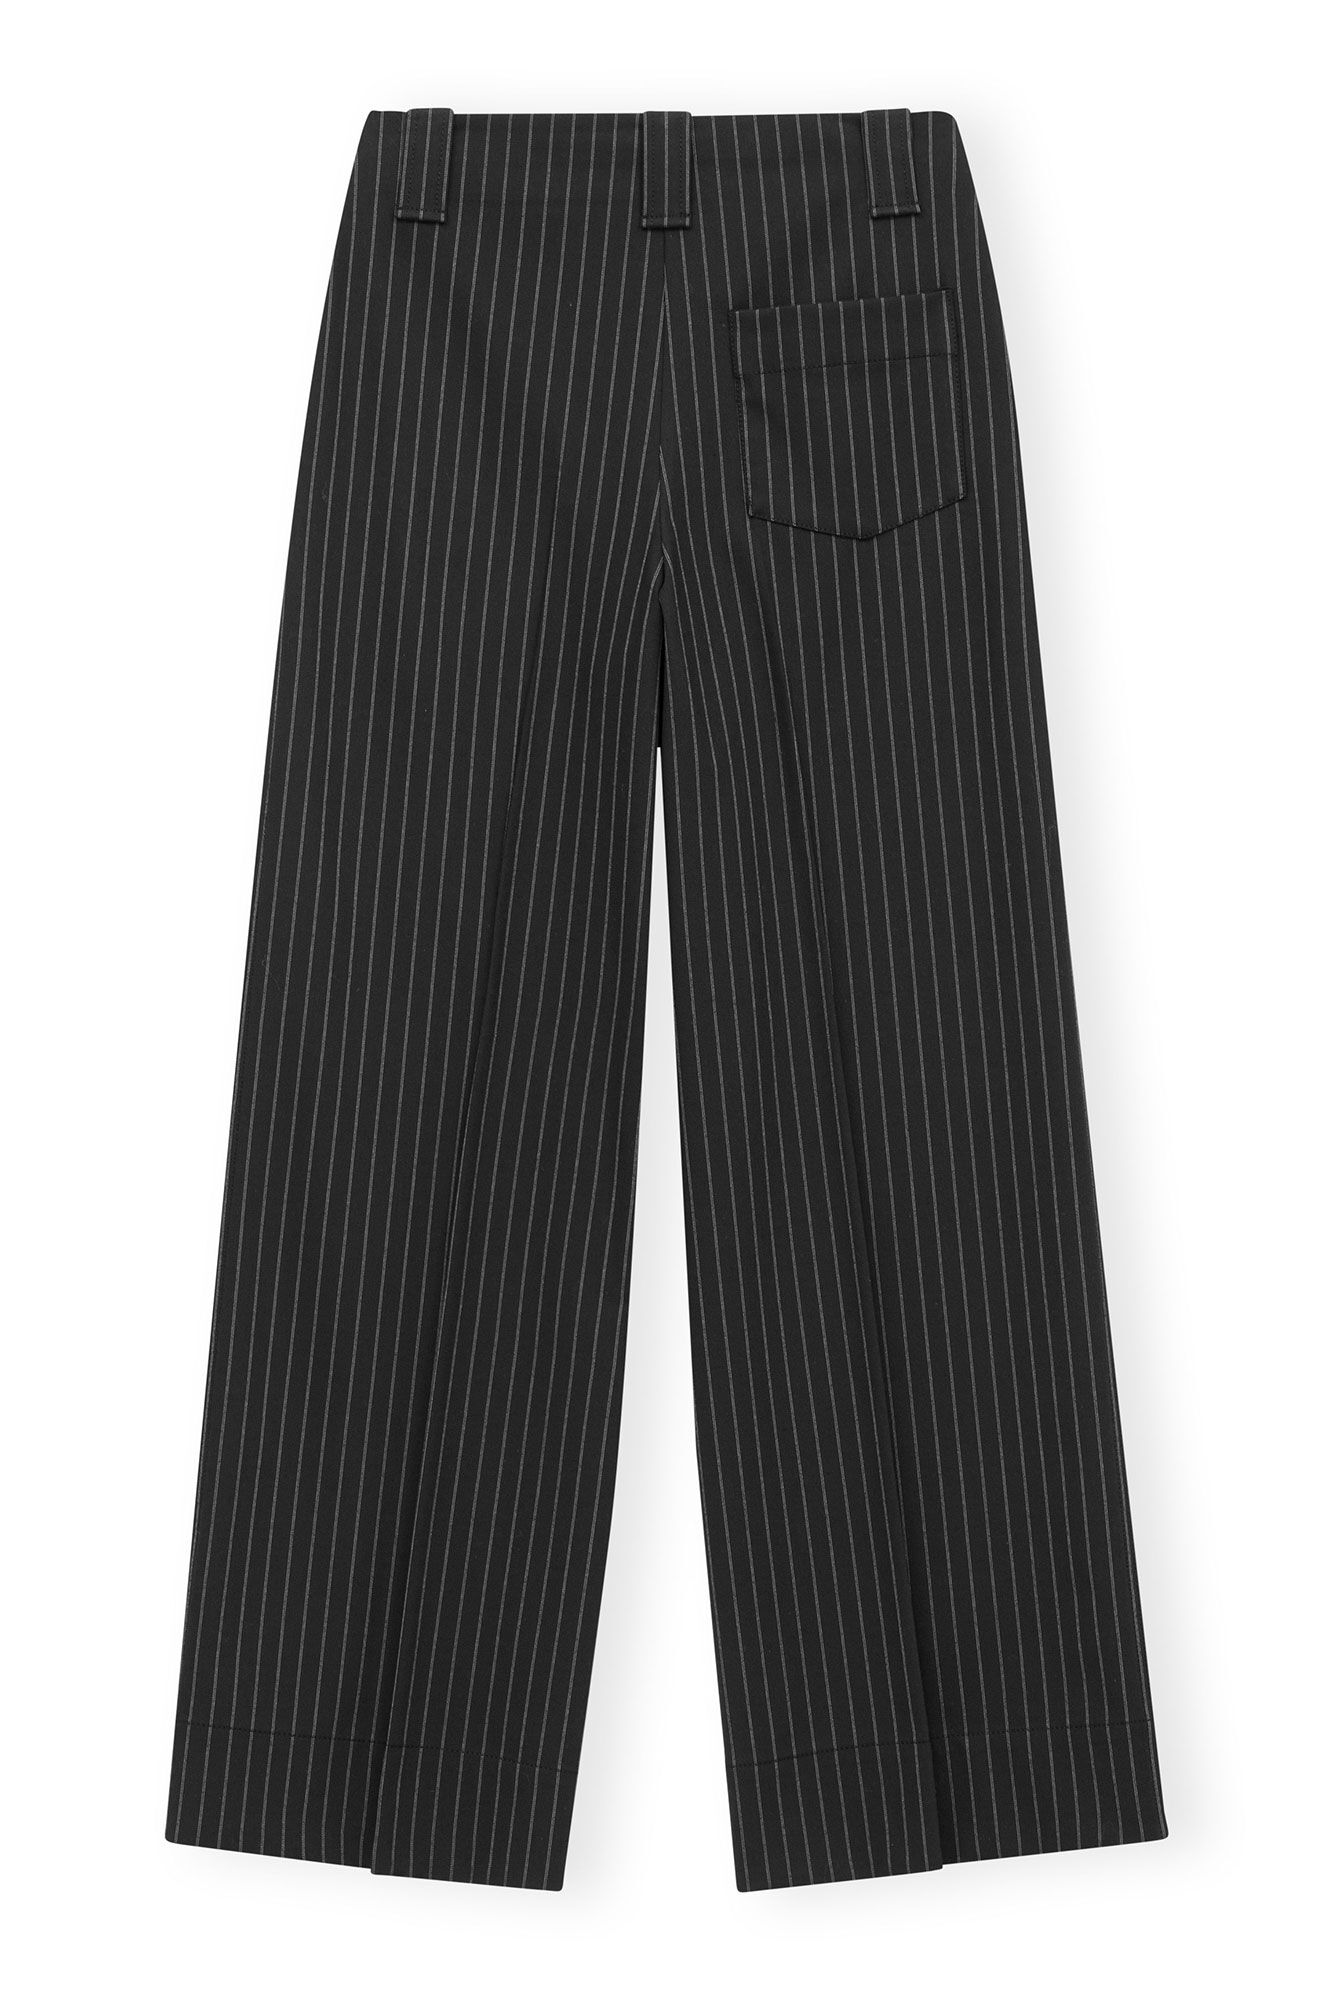 Striped Pants for Summer - Meagan's Moda